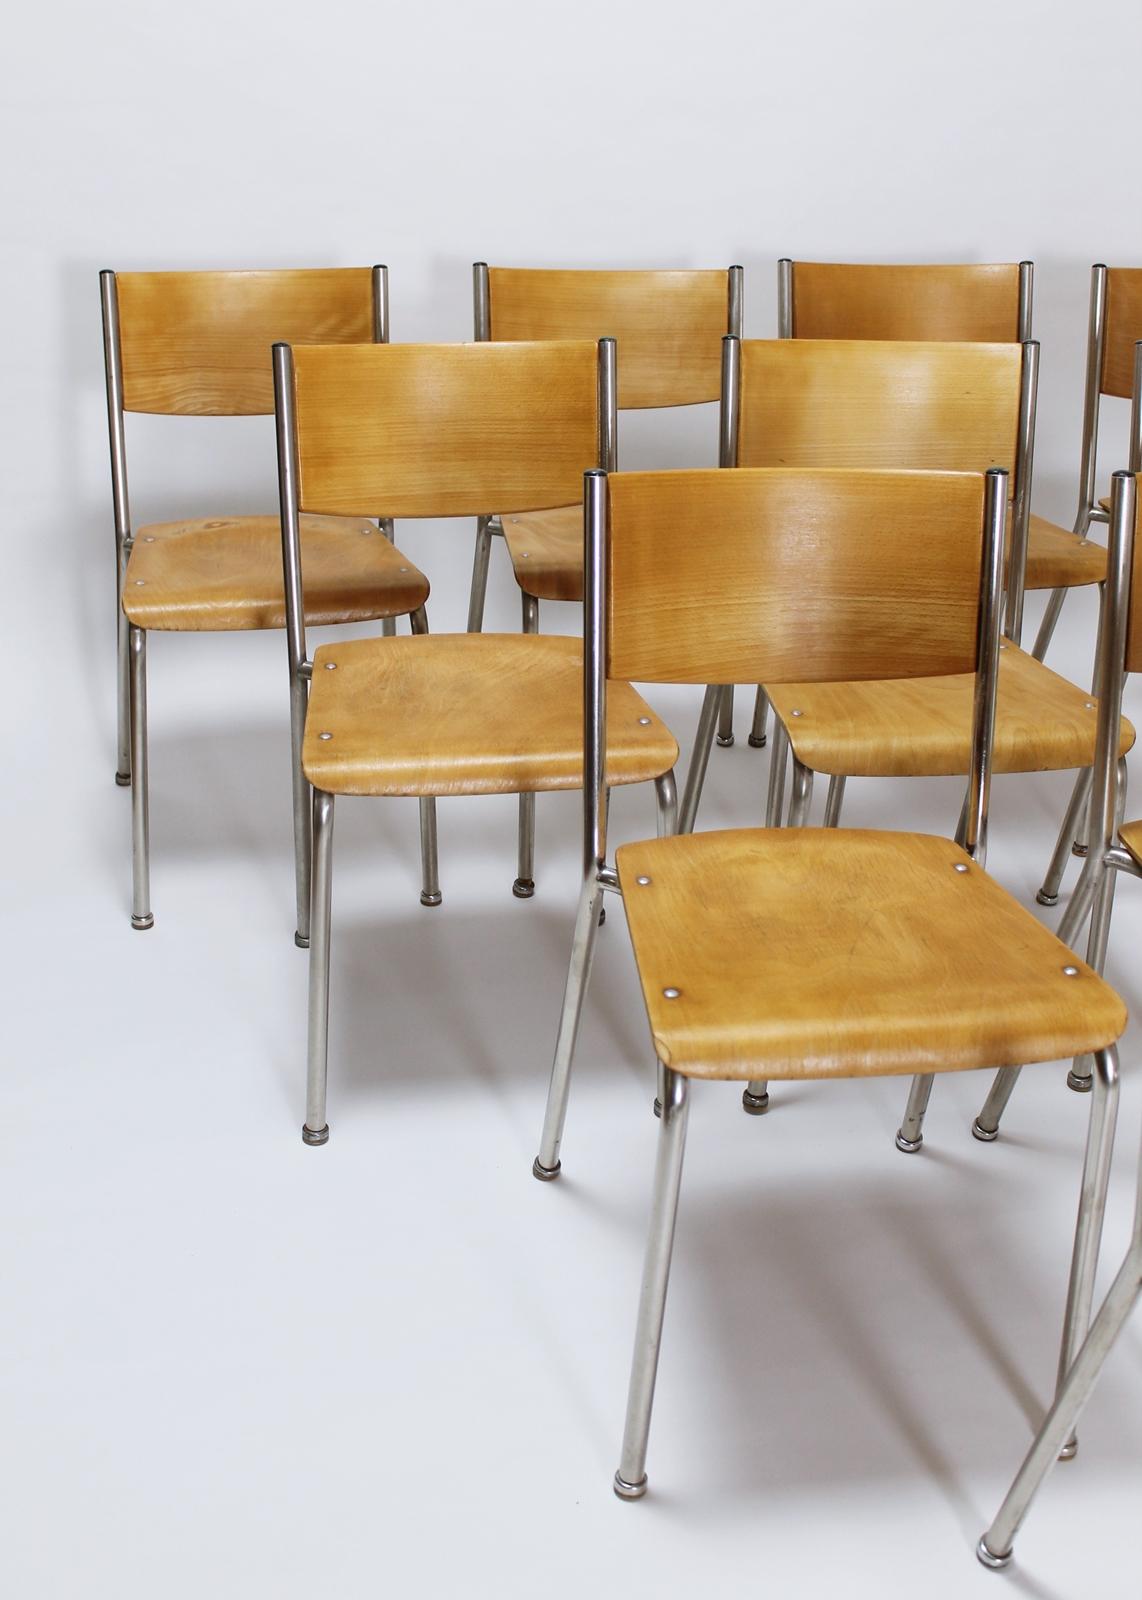 Artibus is a proud to offer these classic Embru stacking chair - a great piece of Swiss industrial design . 

Once most schools and offices would have been filled with these post war industrial classics.

Fabricated from a  tubular steel frame with